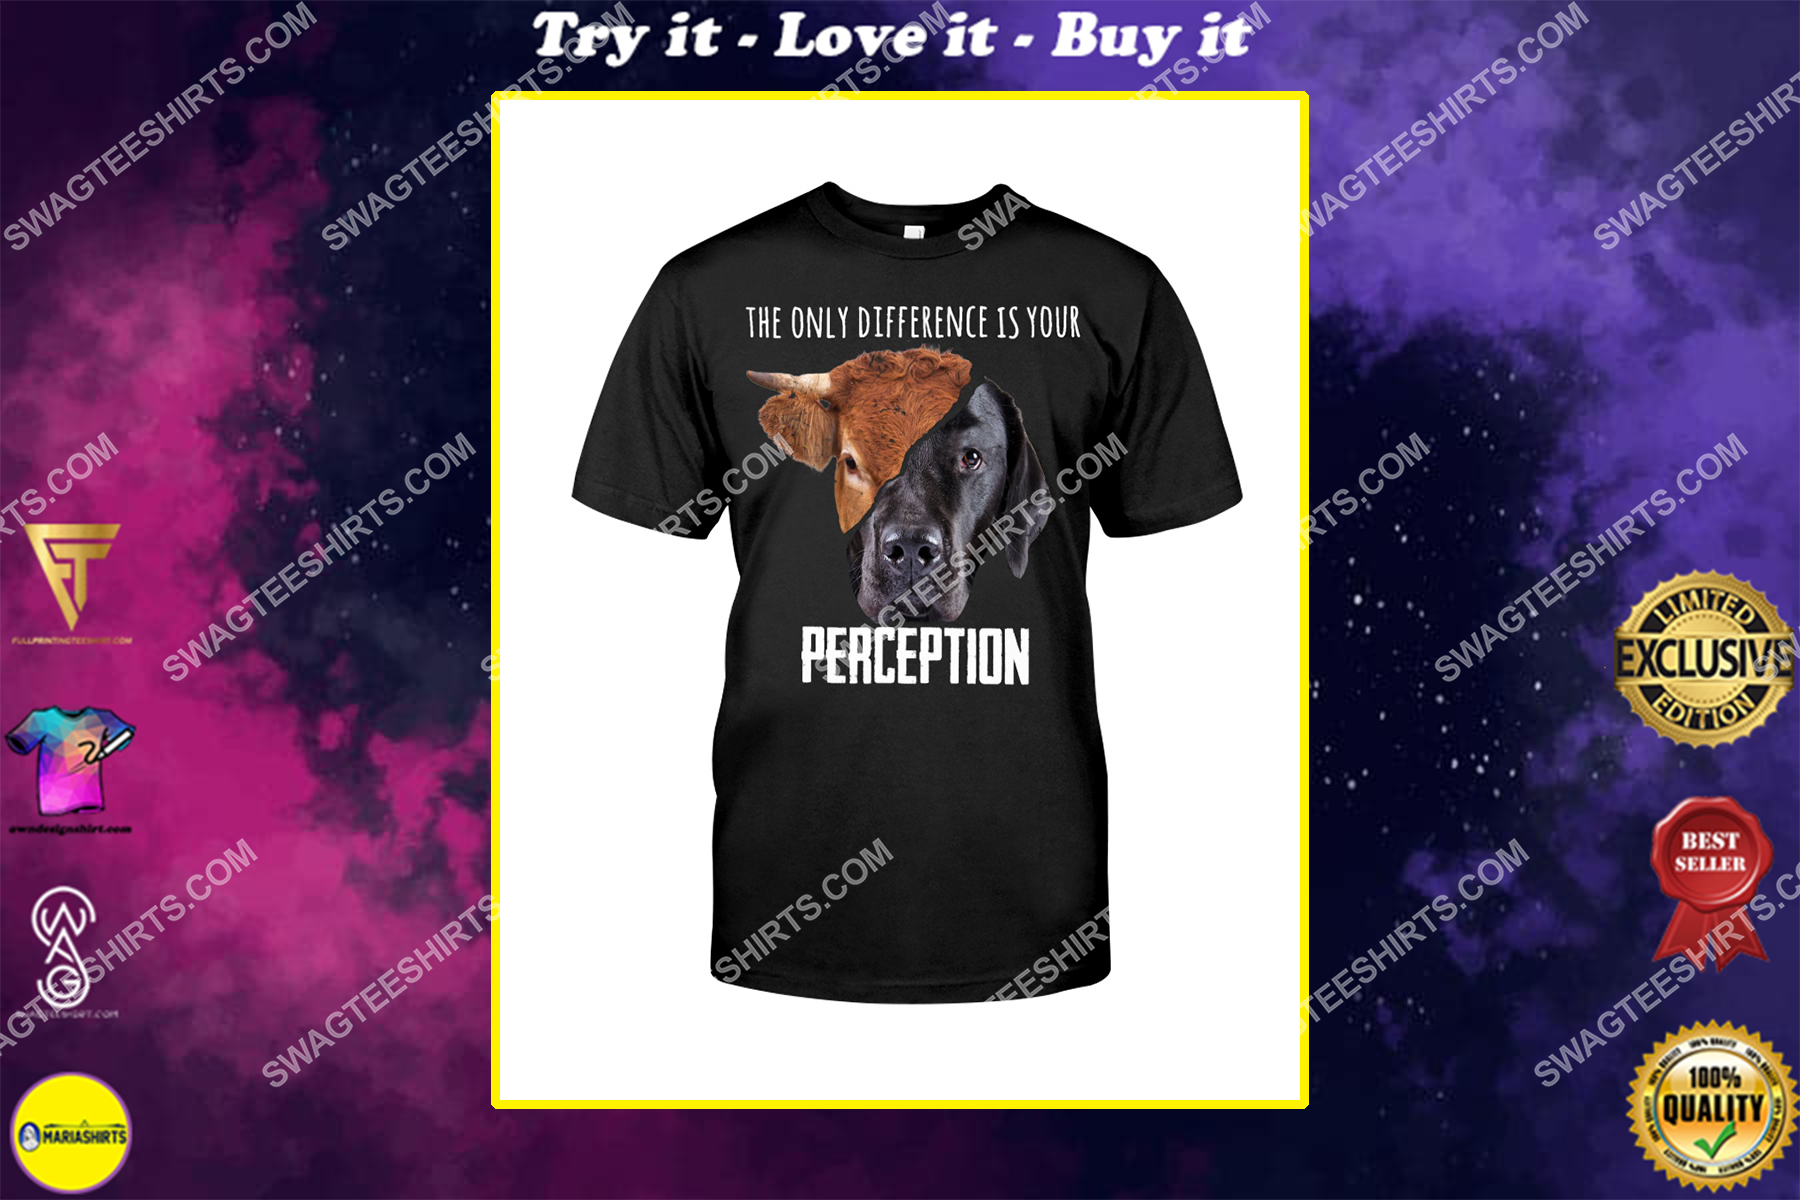 the only difference is your perception save animals shirt